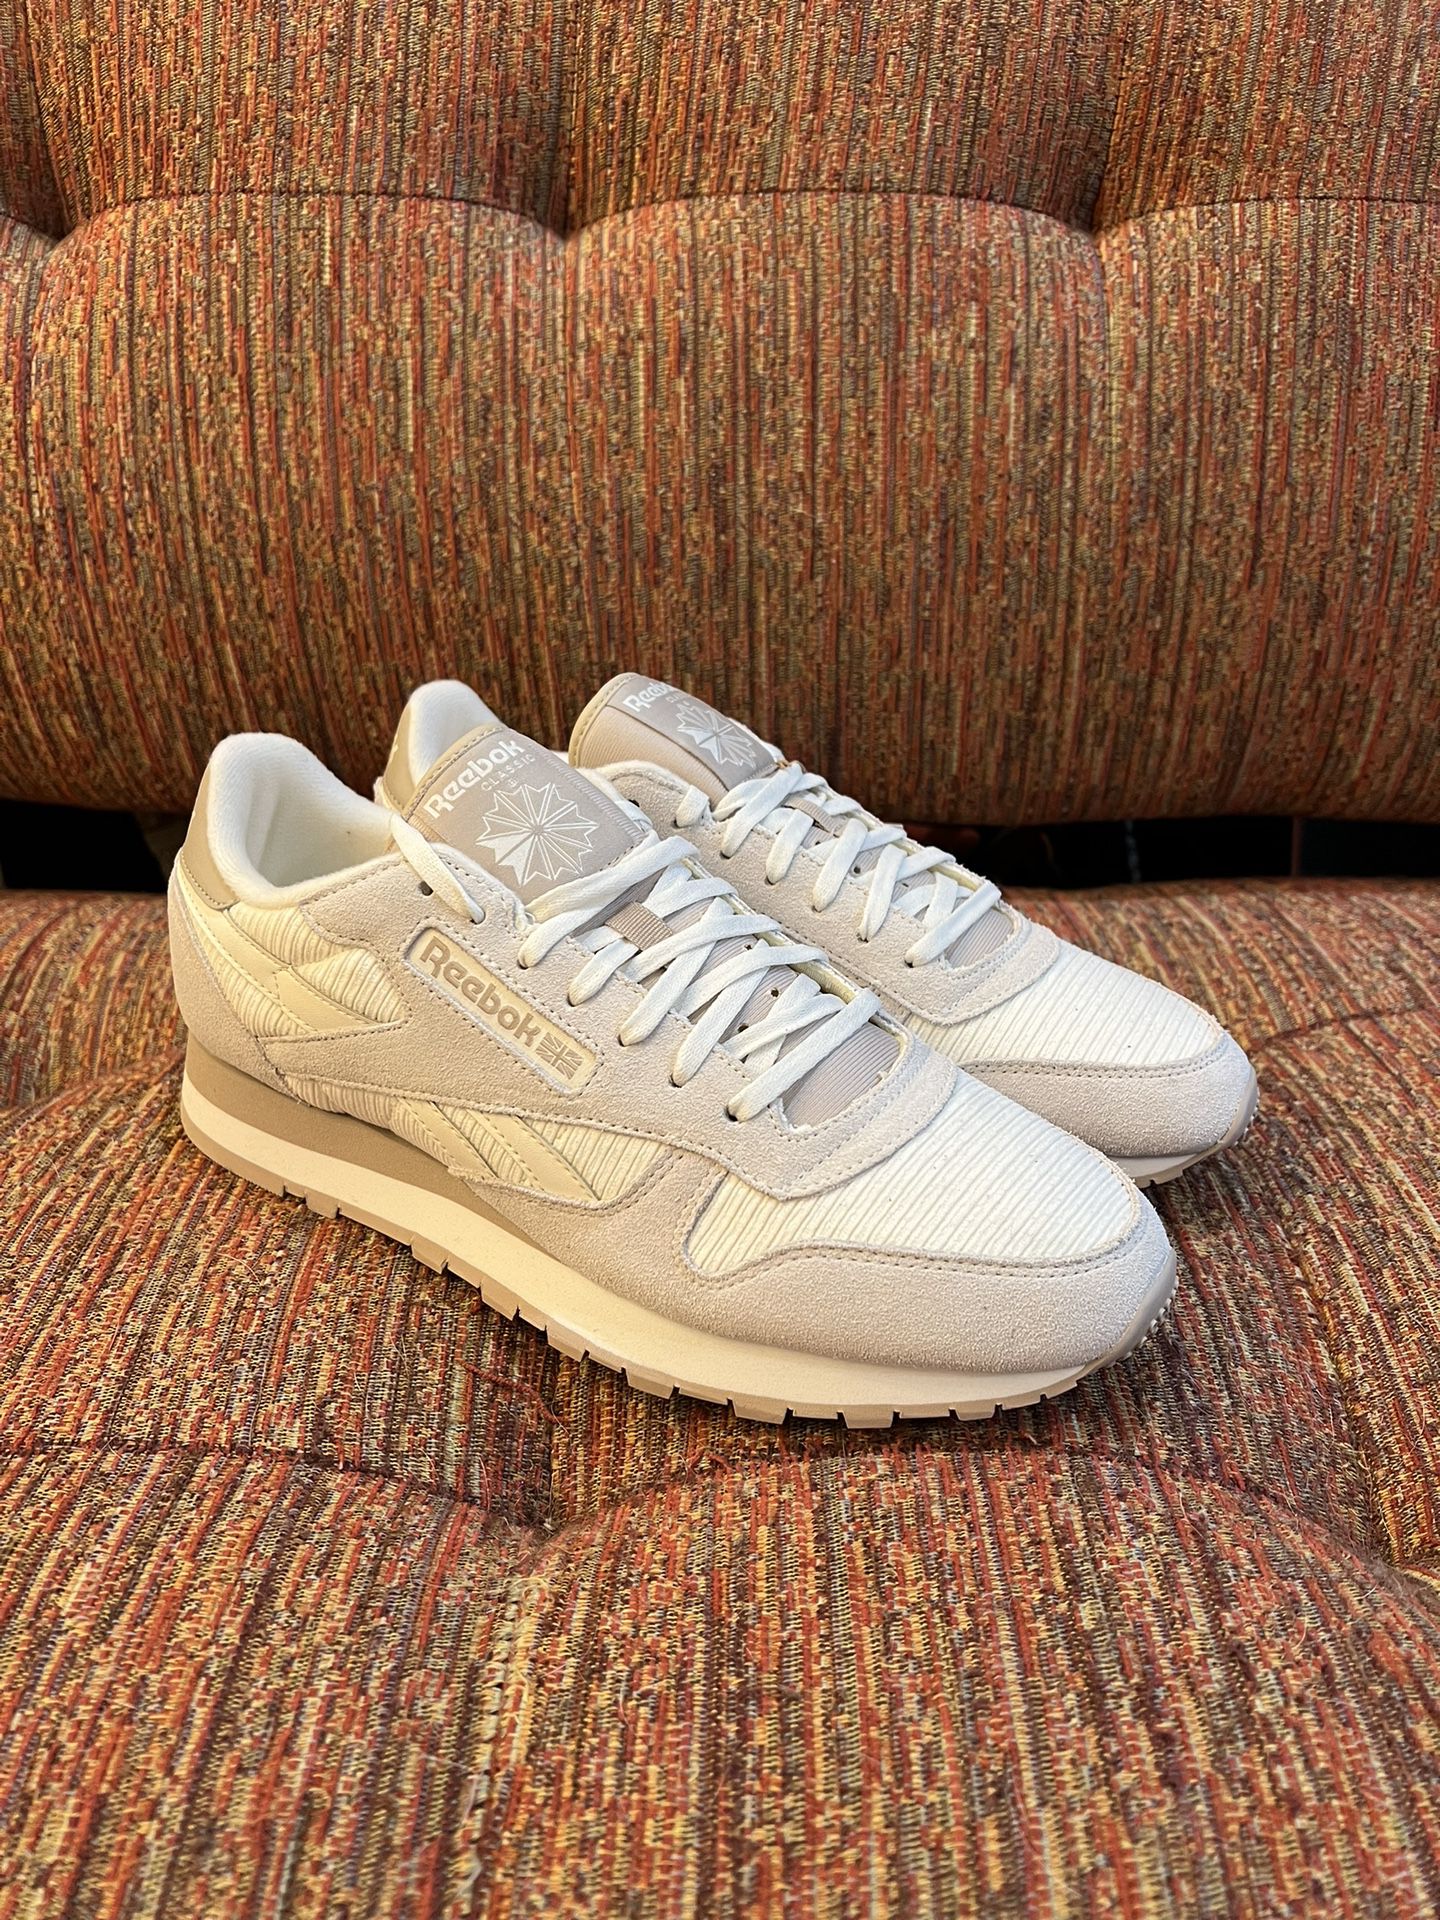 Reebok Classic Leather Size 10 New 